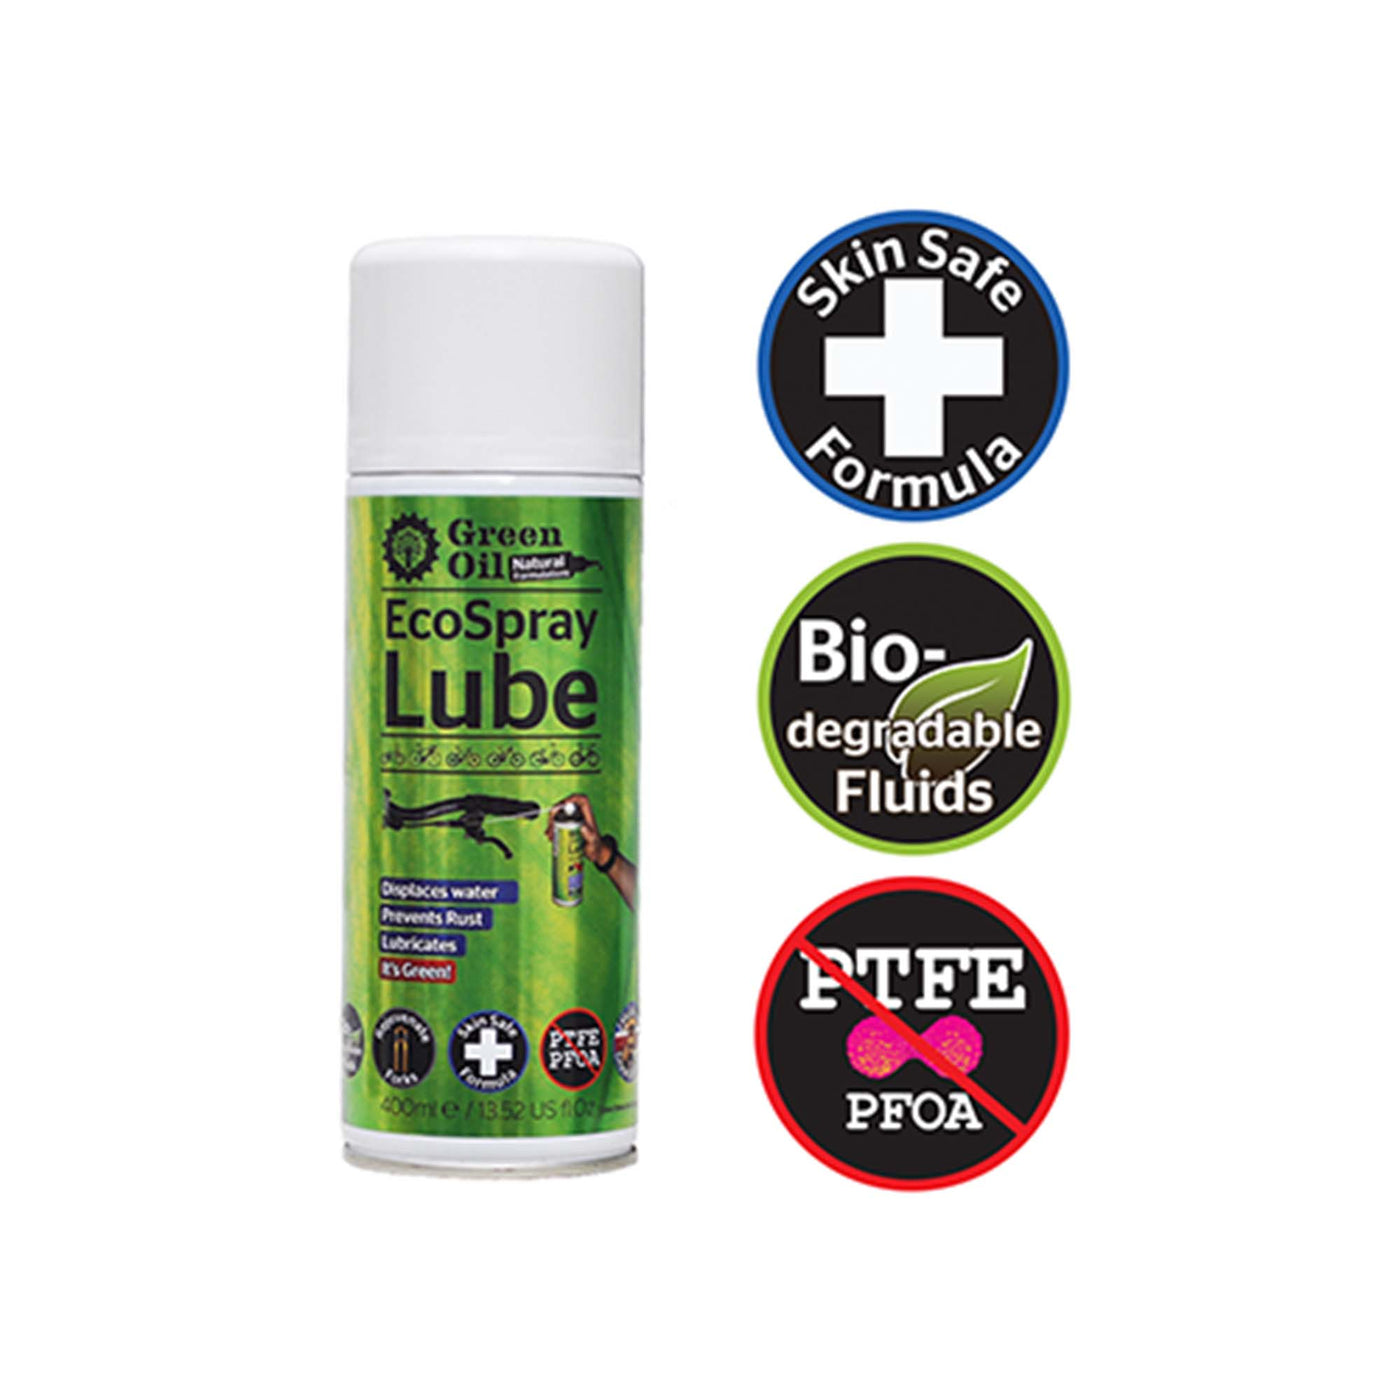 400ml EcoSpray lube can, produced by Green Oil. Vegan friendly, skin safe fluid which is bio-degradable.